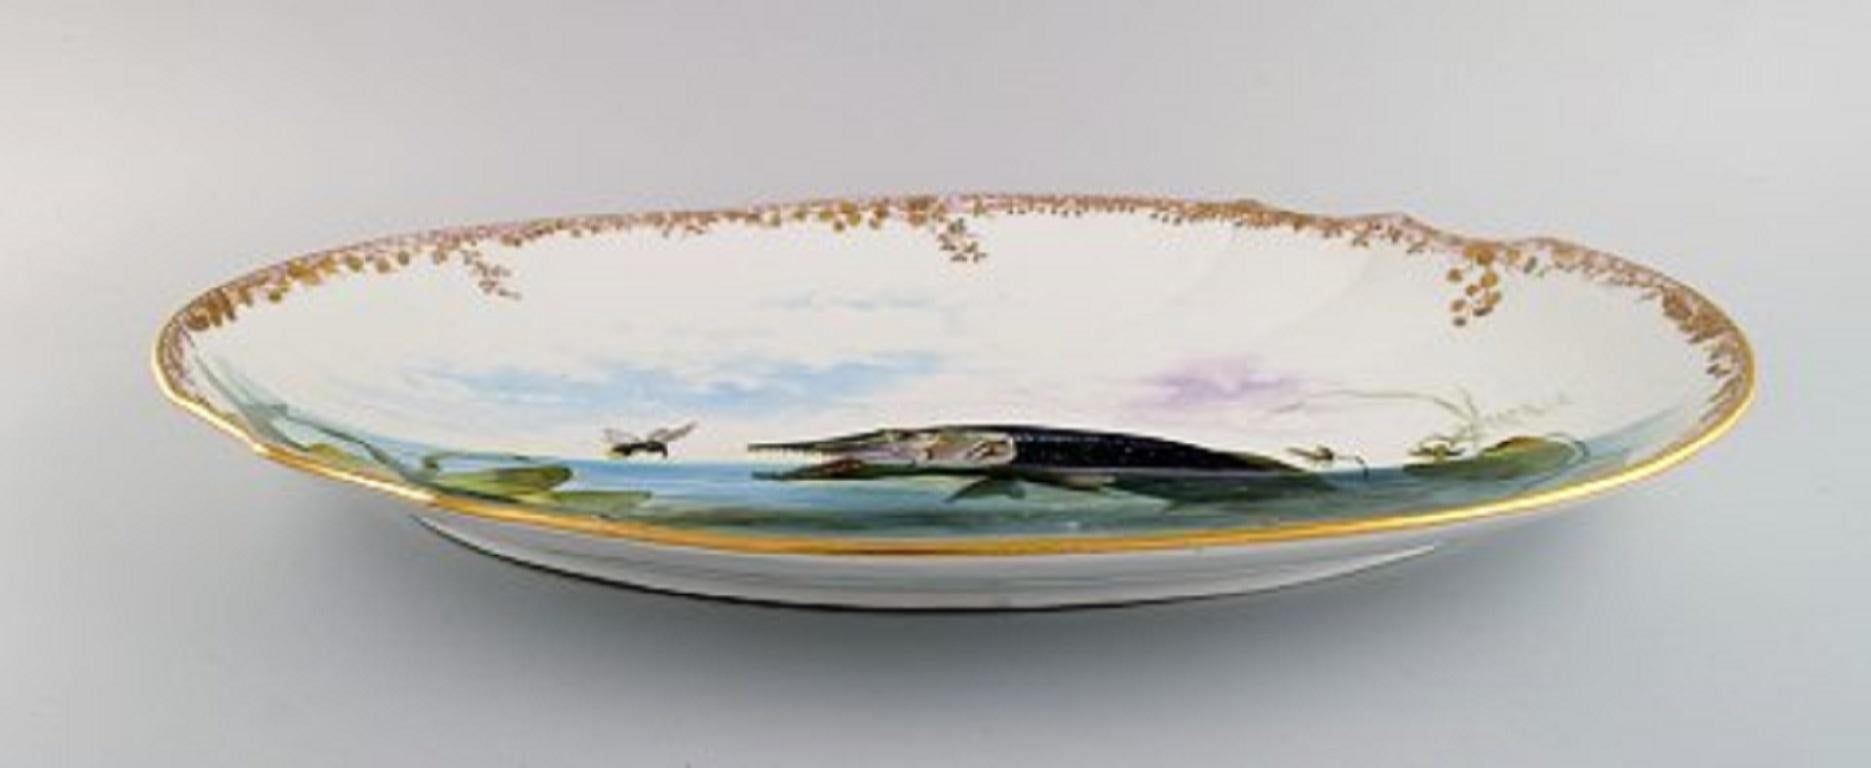 20th Century Large Pirkenhammer Serving Dish in Porcelain with Hand-Painted Fish, Early 20th For Sale